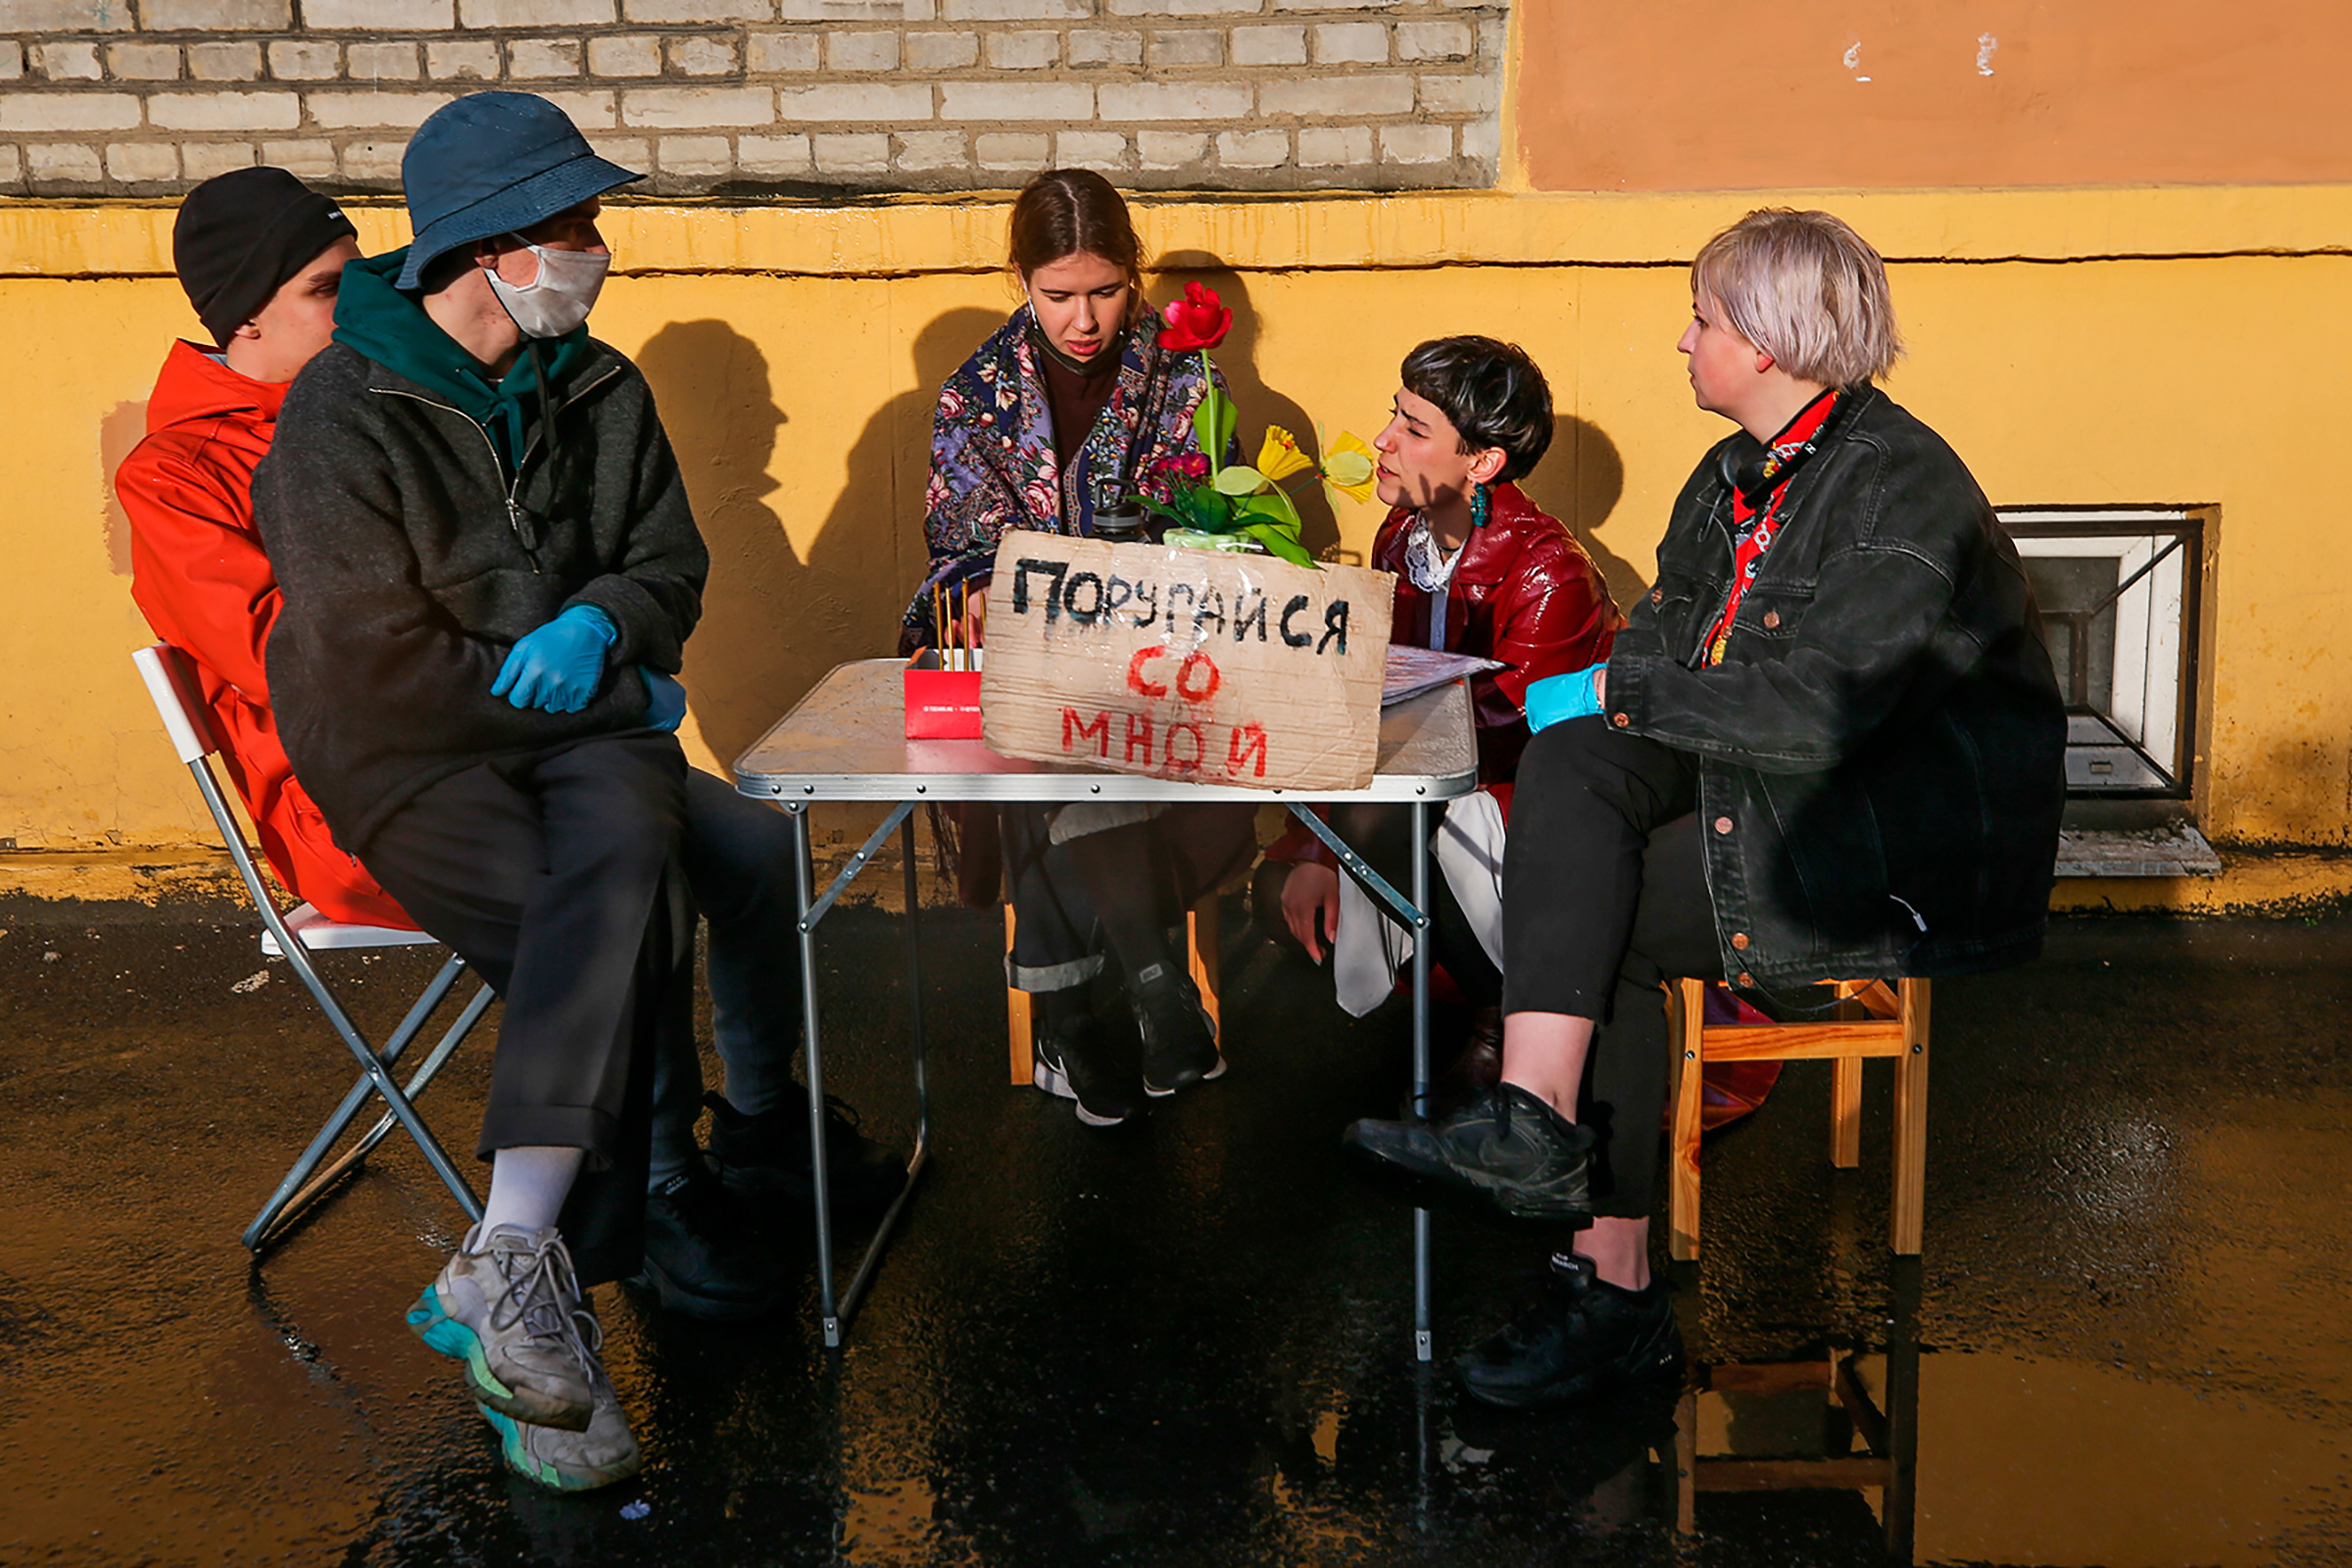 The art performance Quarrel With Me, shown in St. Petersburg in May, was organized by artist and activist Katrin Nenasheva, second from right, to address the topic of domestic violence during Russia’s lockdown. In the performance, Nenasheva invites people to have a quarrel with her. (Peter Kovalev—TASS/Getty Images)